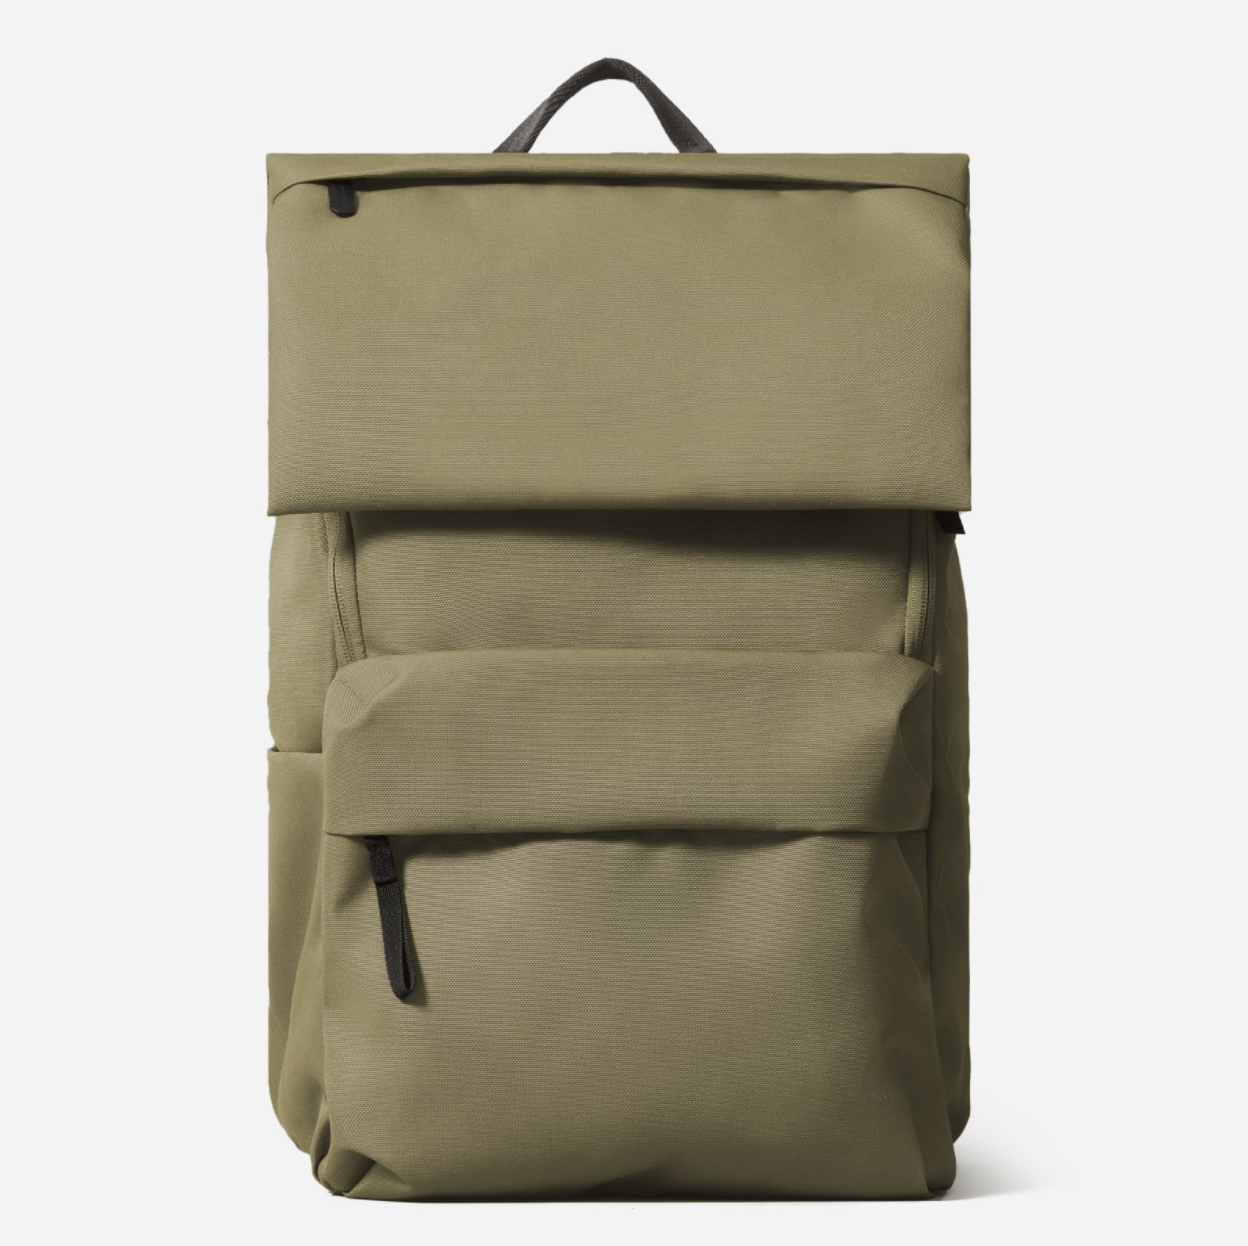 The ReNew 15 Inch Transit Backpack